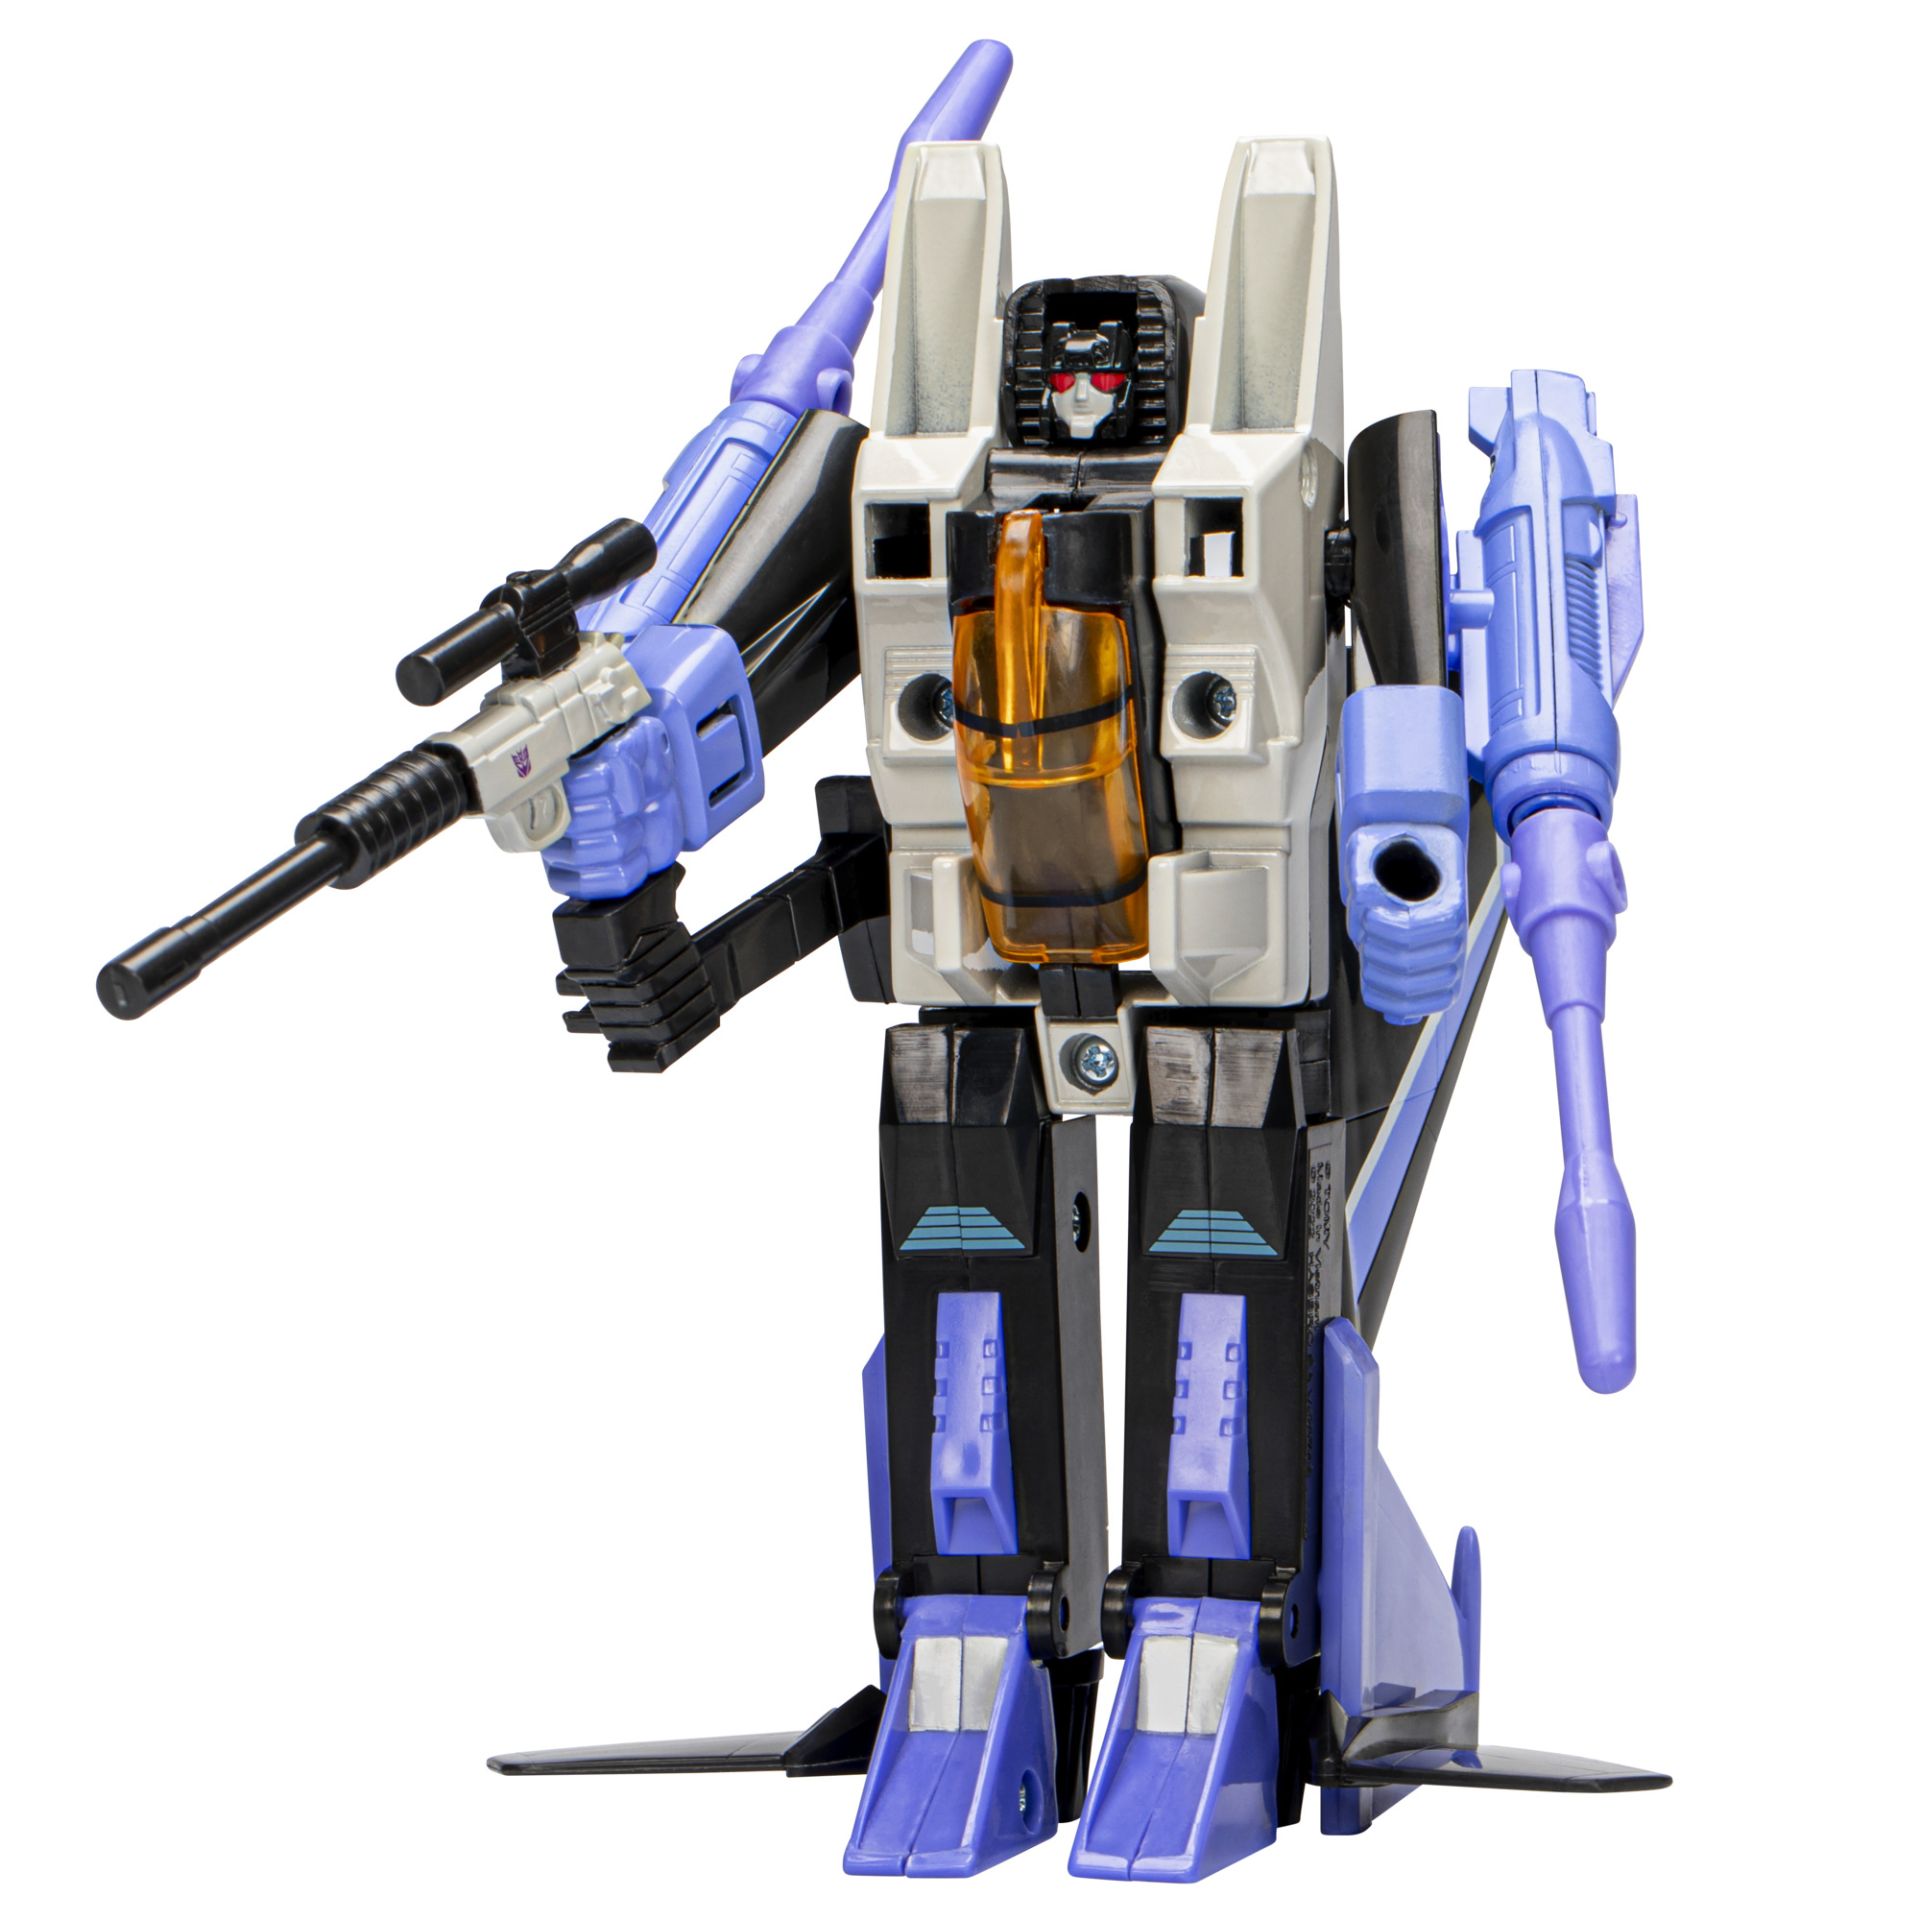 Transformers Toys Retro The Transformers: The Movie G1 Skywarp Toy